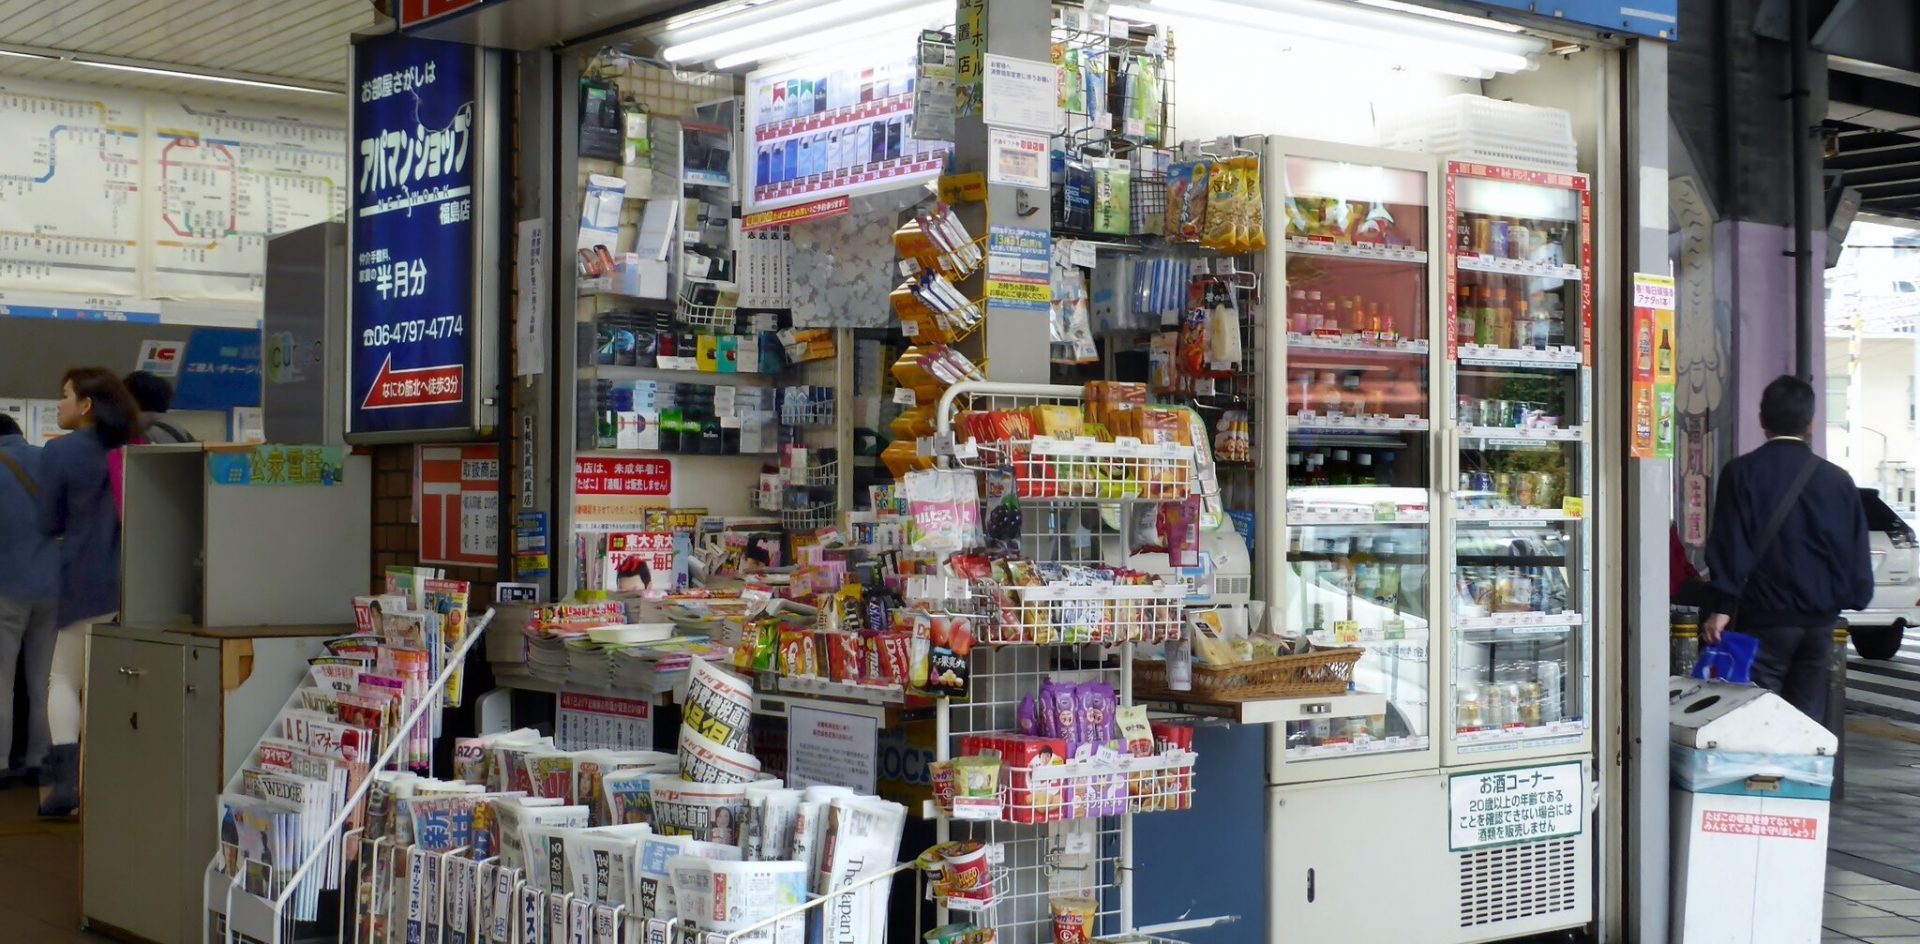 A newspaper kiosk in Japan. Nikkei has developed a testing approach that allows it to navigate competing results by focusing on subscription revenue growth. Photo by Tokumeigakarinoaoshima from WikiMedia